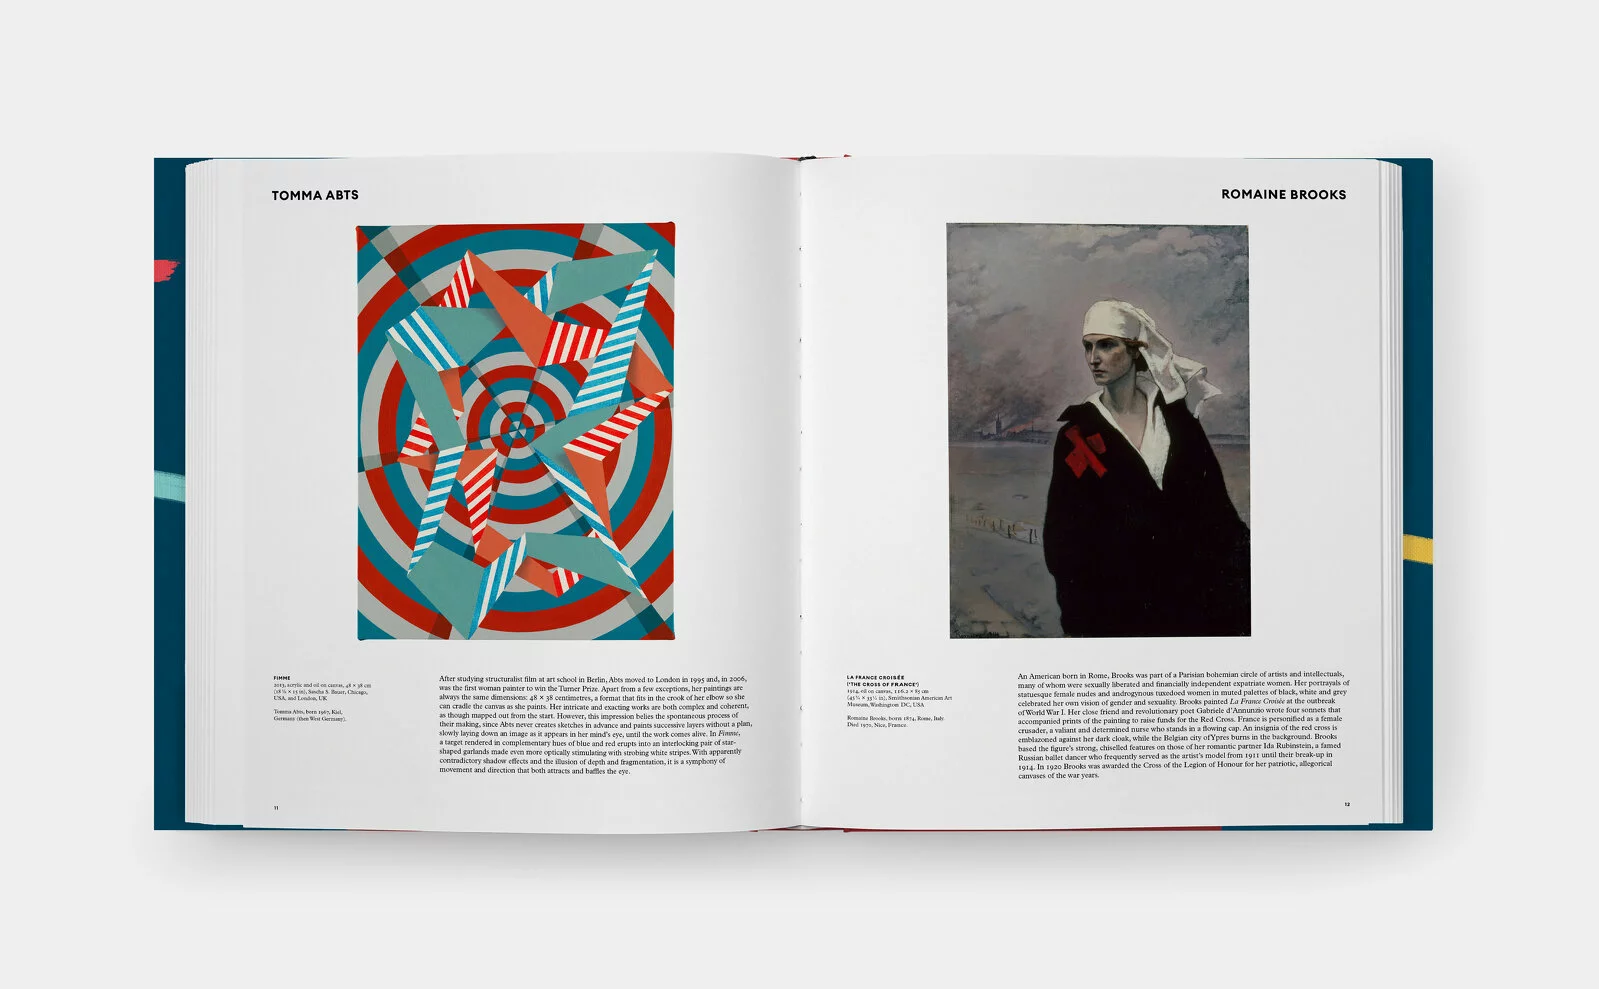 Great Women Painters. Introduction by Alison M. Gingeras. Phaidon
Left to right: Tomma Abts // Romaine Brooks. 2022/10/great-woman-painters-en-6328-3d-spread-1-3880.jpg 